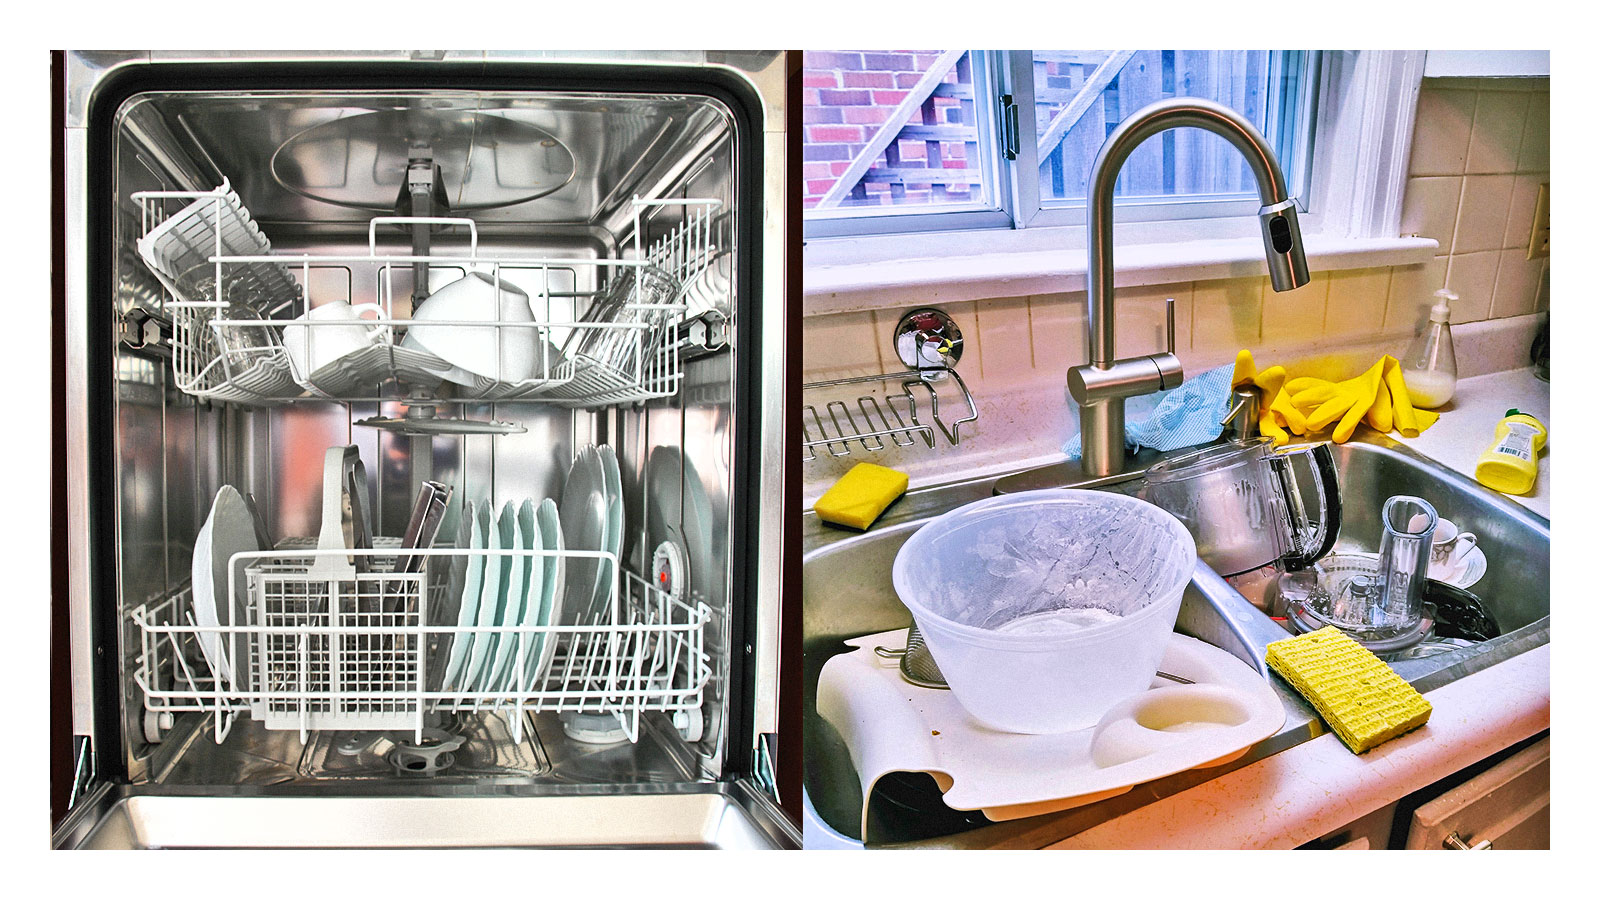 Dishwash vs hand wash: which method is better for the environment?